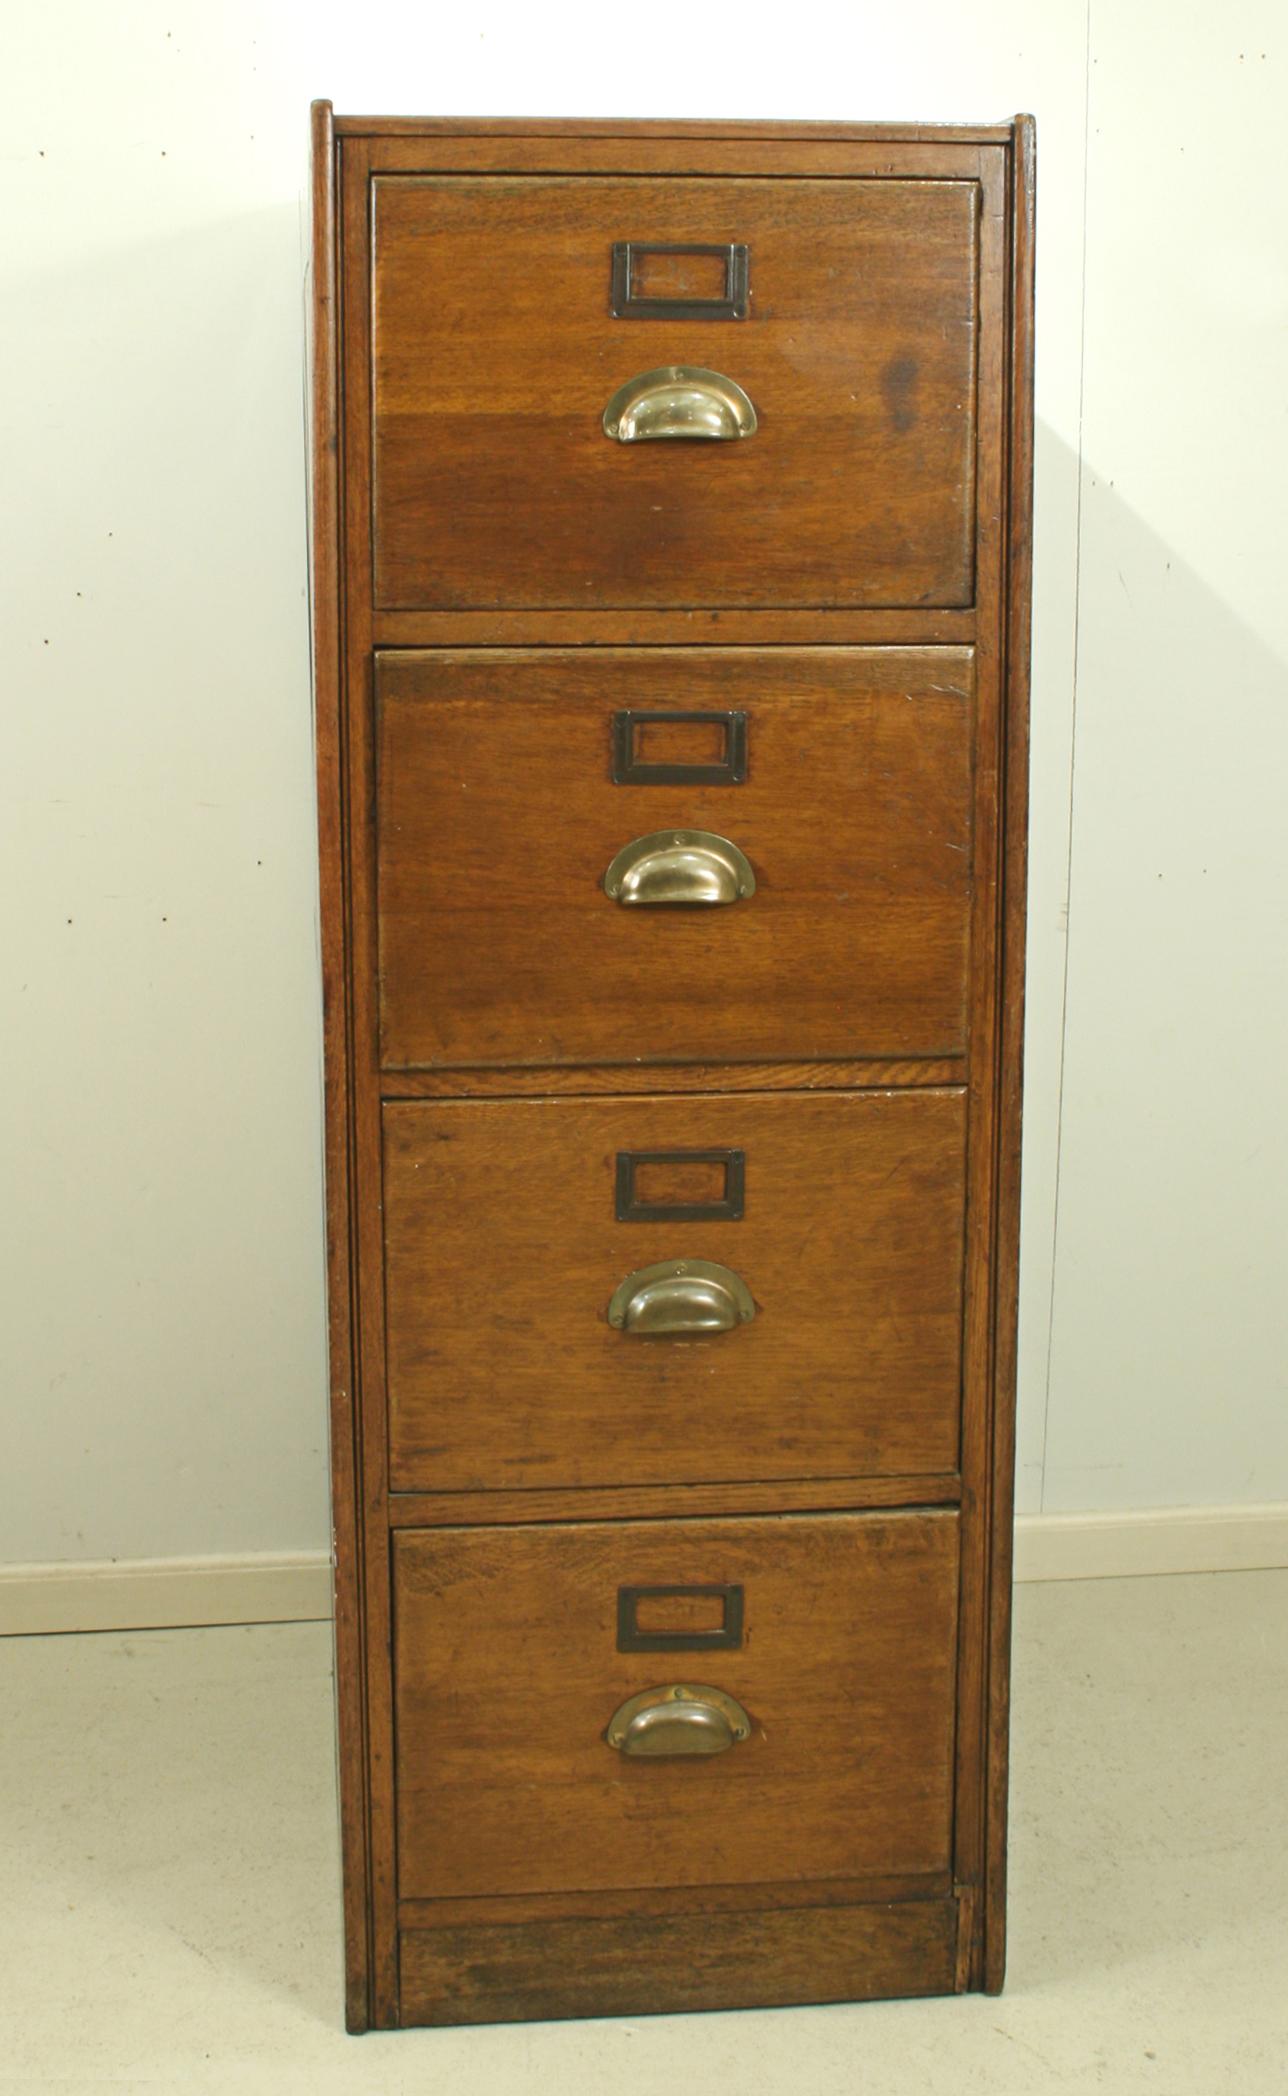 A high quality solid oak filing cabinet made by the Office Furniture Company. The cabinet has four drawers with brassed handles and the original card holders. It bears the makers trade label to the side which reads 'Office Furniture Co., 184